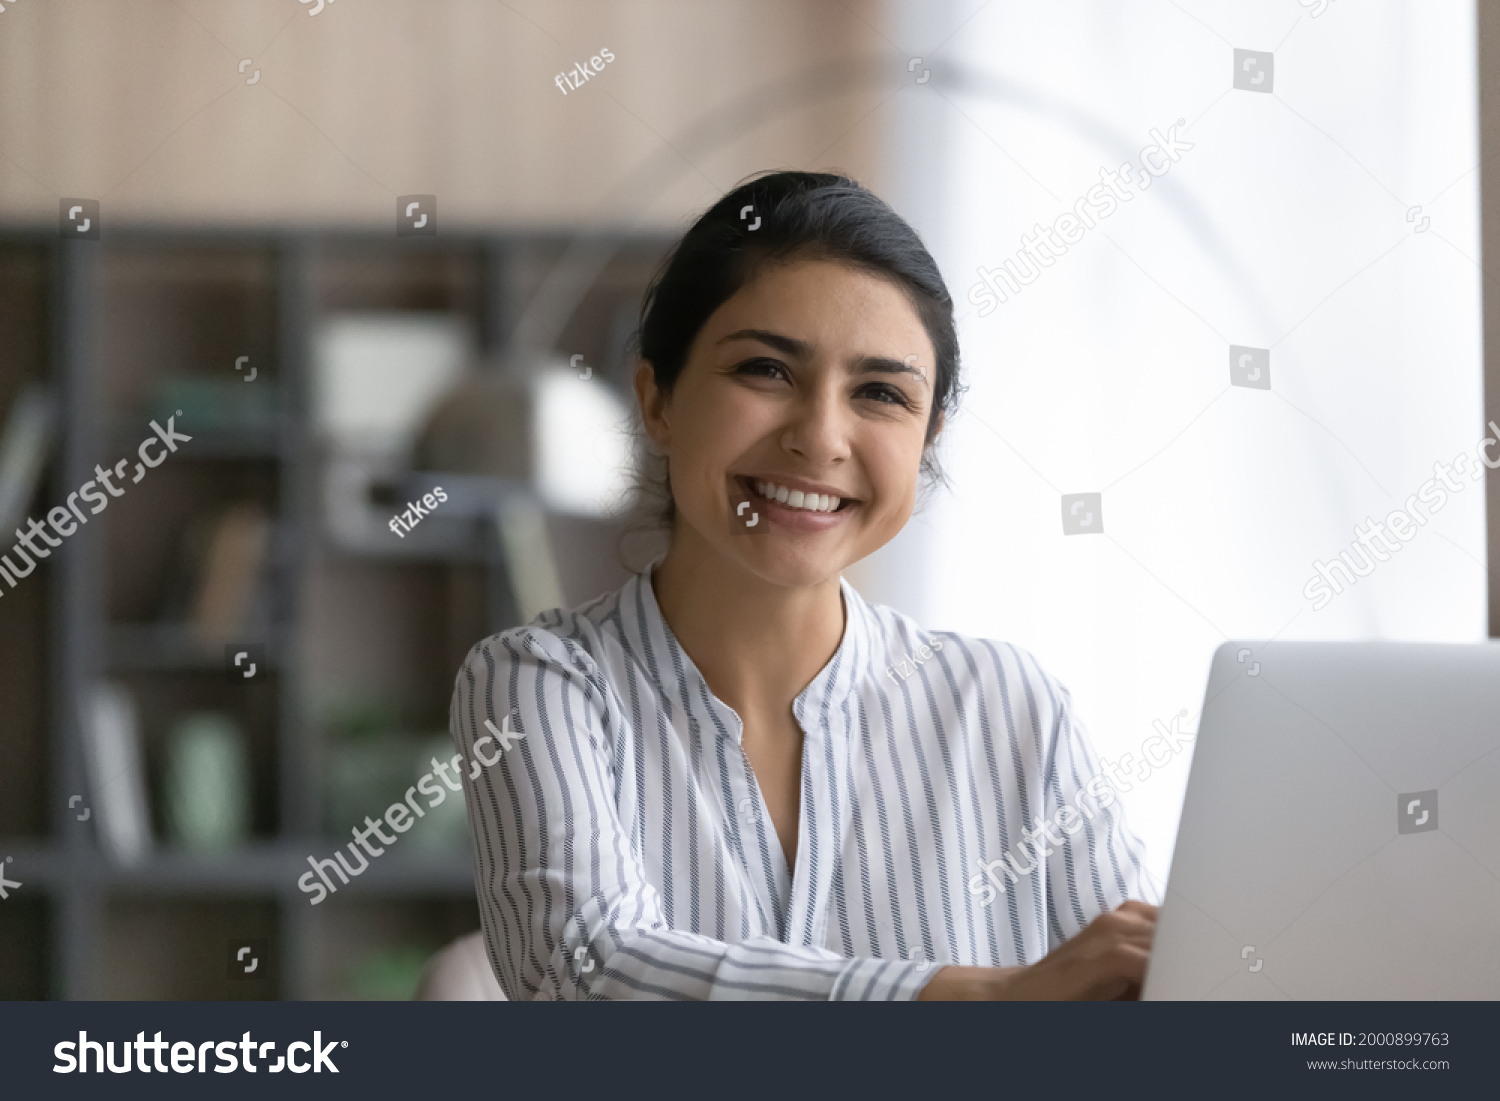 White collar. Happy young indian female accountant consultant sit at workplace by laptop take break in typing document look at camera. Headshot portrait of cheerful ethnic woman use pc in office work #2000899763